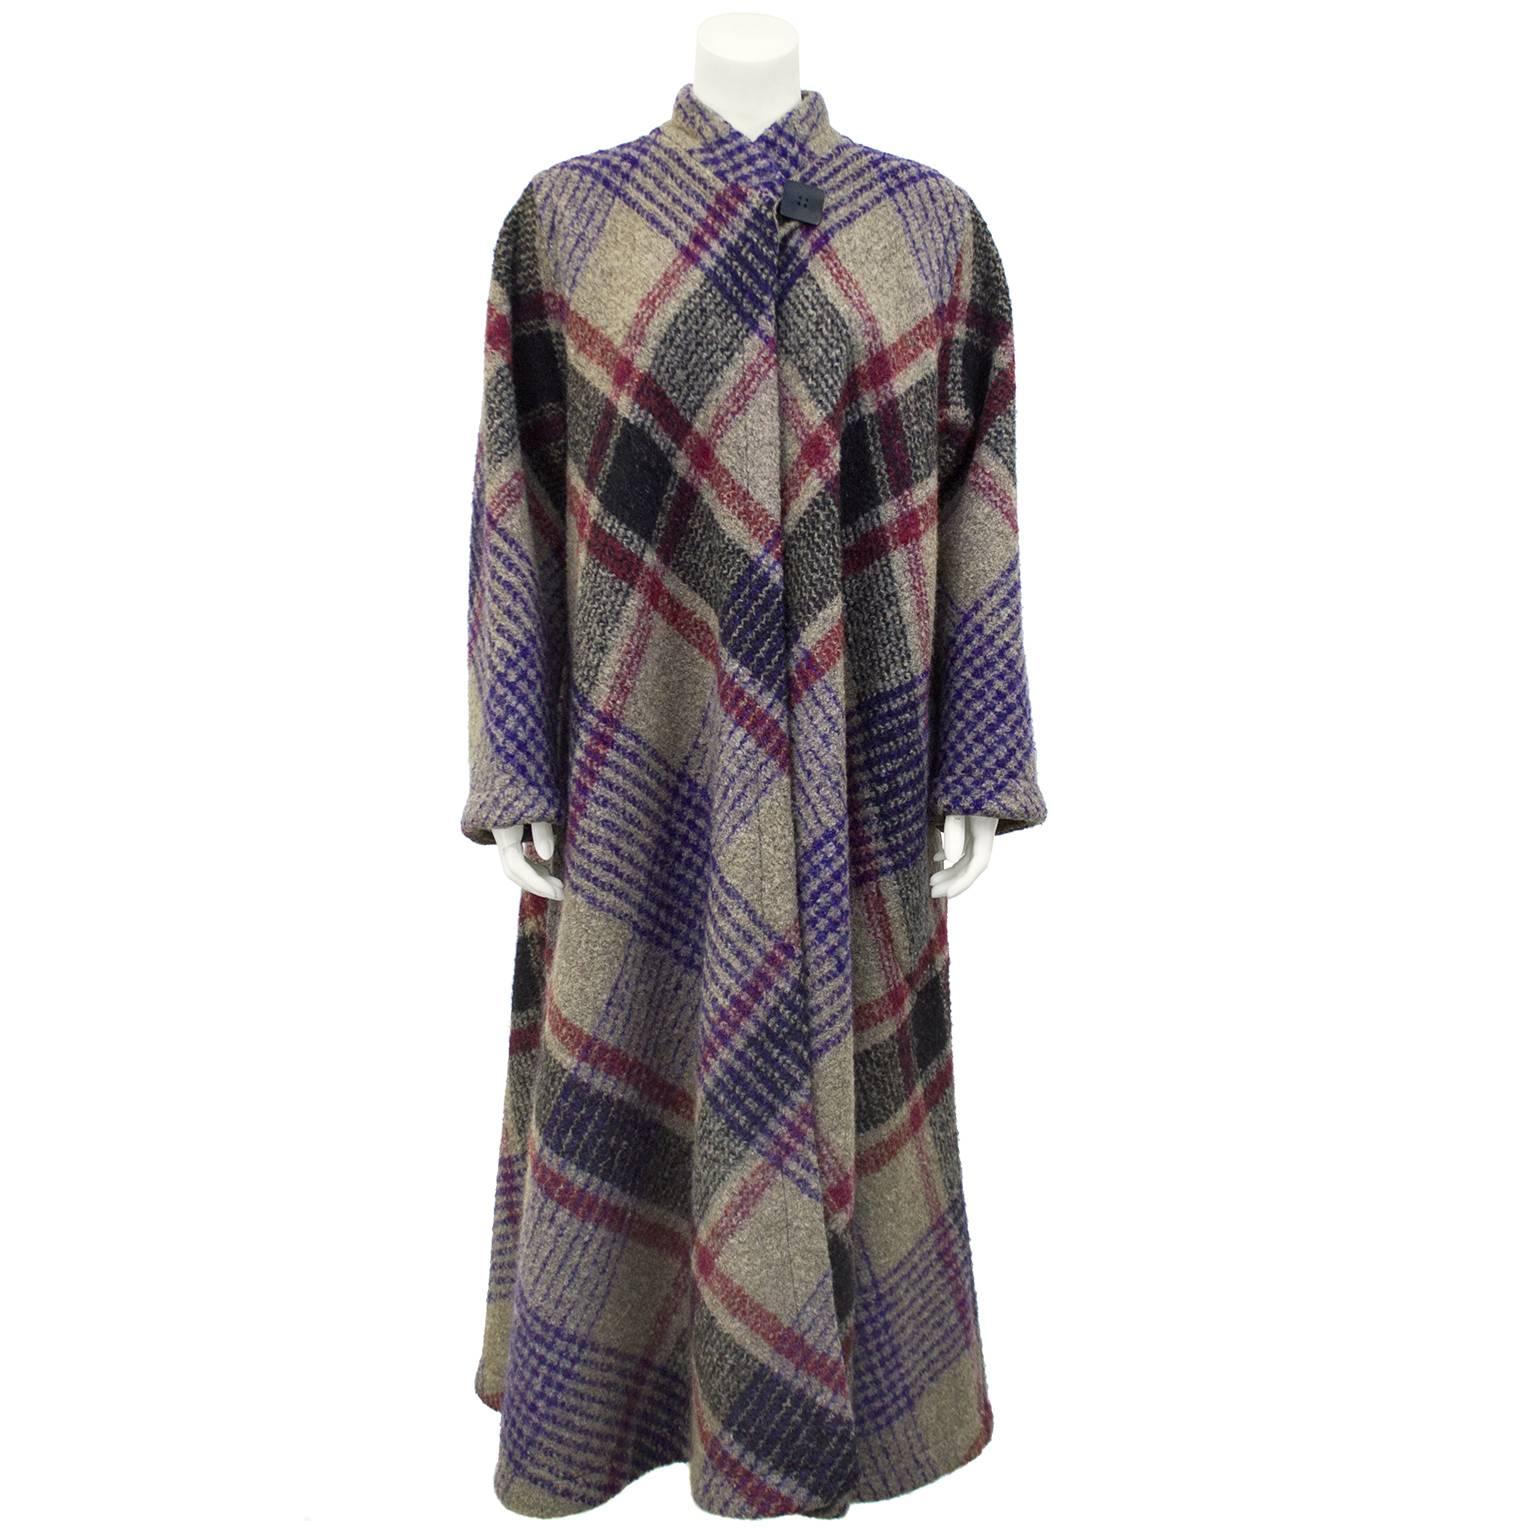 1970s Missoni long wool coat featuring a grey, black, purple and red diagonal tartan. Singular black black square button closure at neck. Unlined. Excellent vintage condition.  Fits from US 4-10.

Sleeve 23